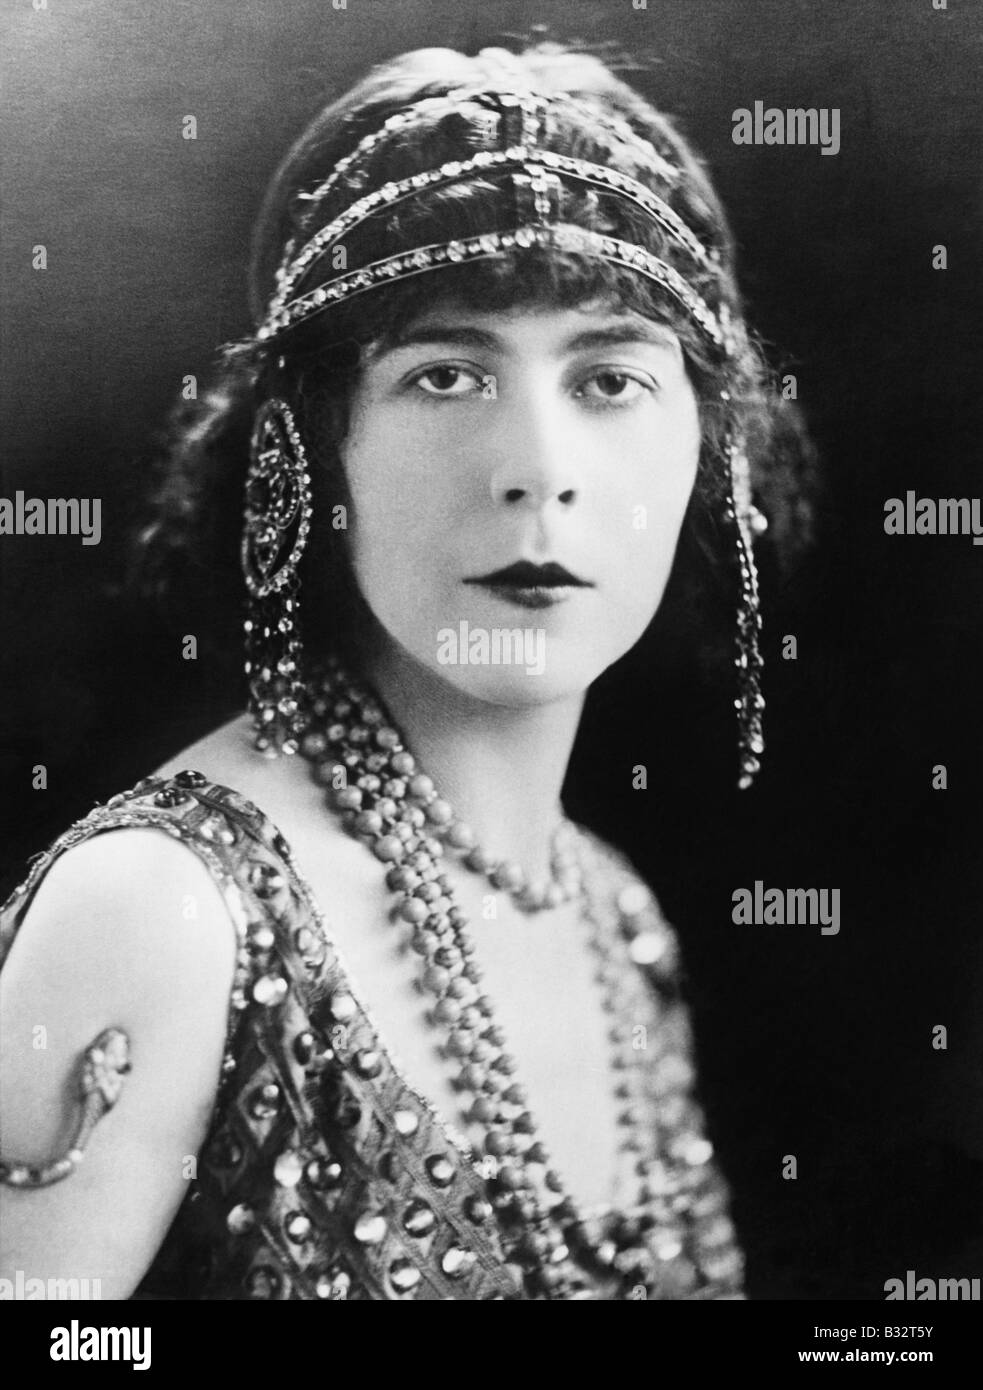 Portrait of a woman with ornate head jewelry Stock Photo